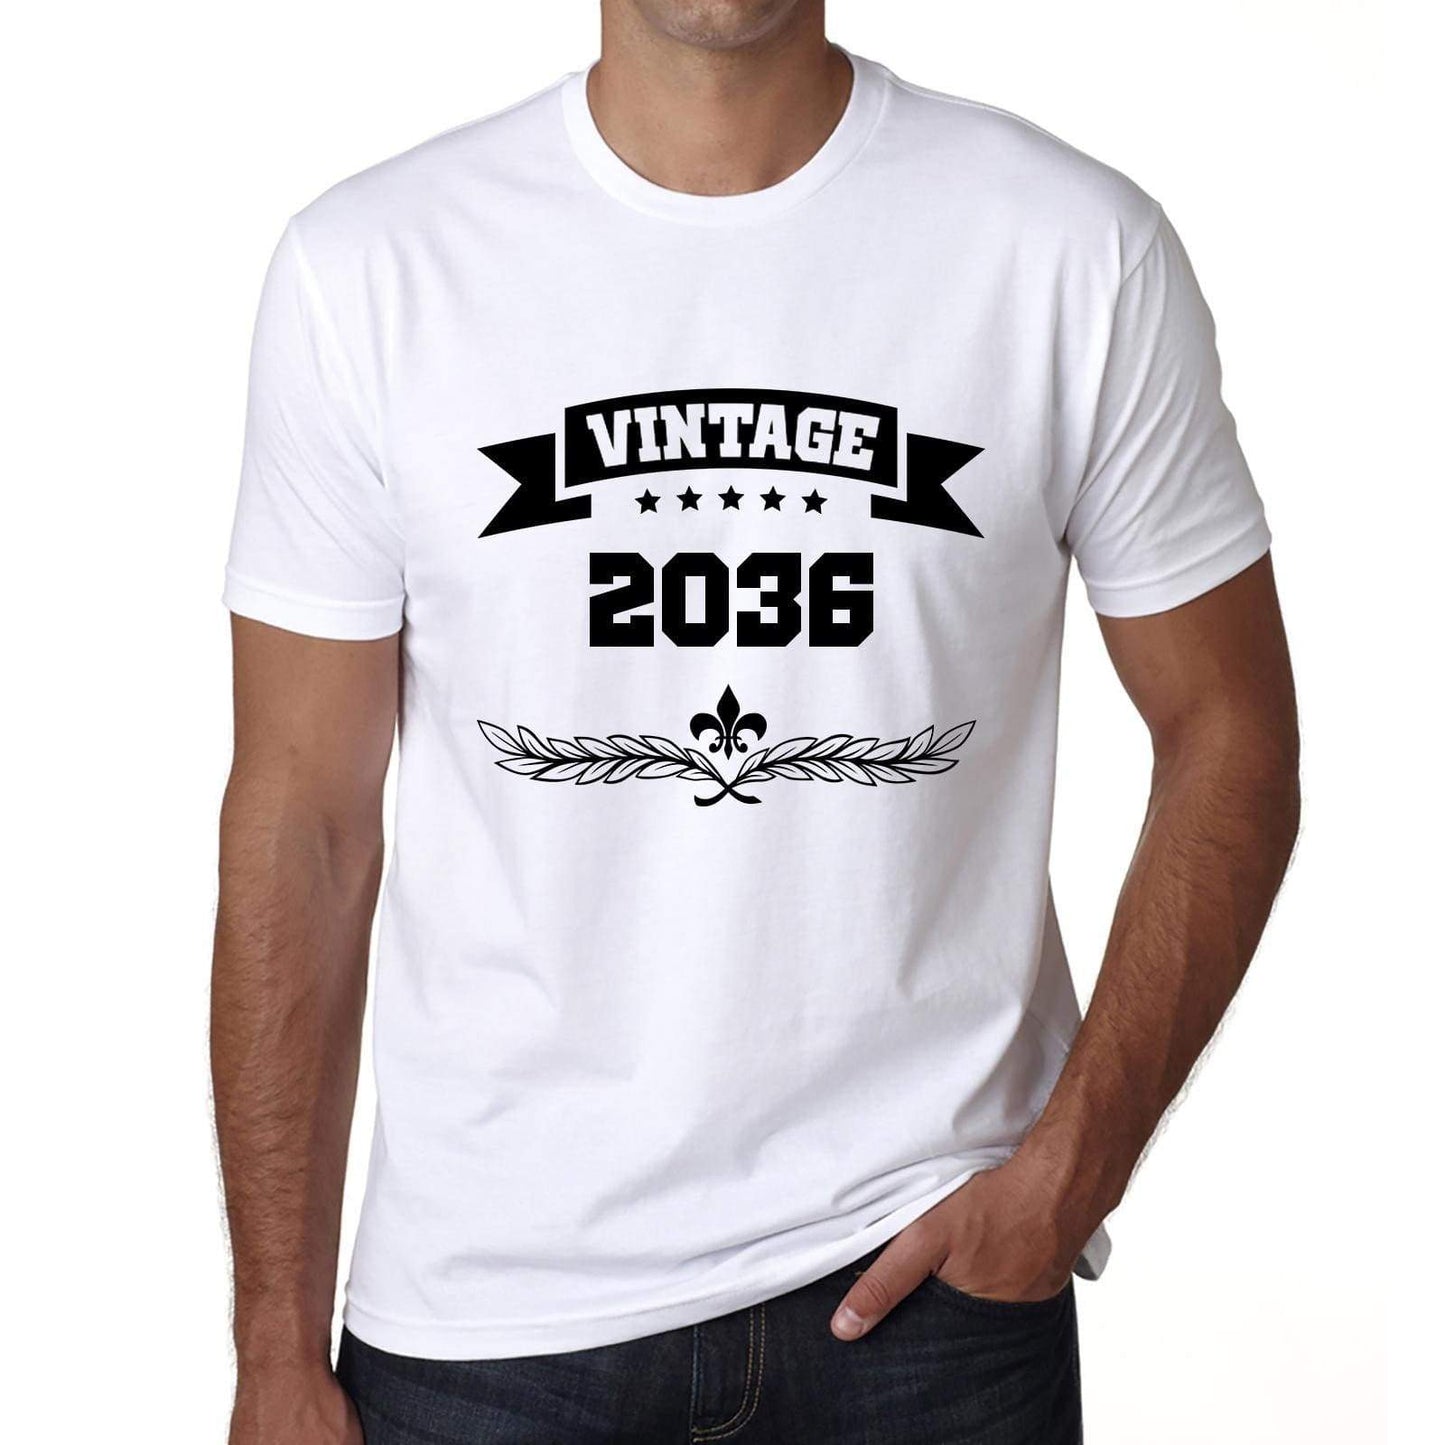 2036 Vintage Year White Mens Short Sleeve Round Neck T-Shirt 00096 - White / S - Casual